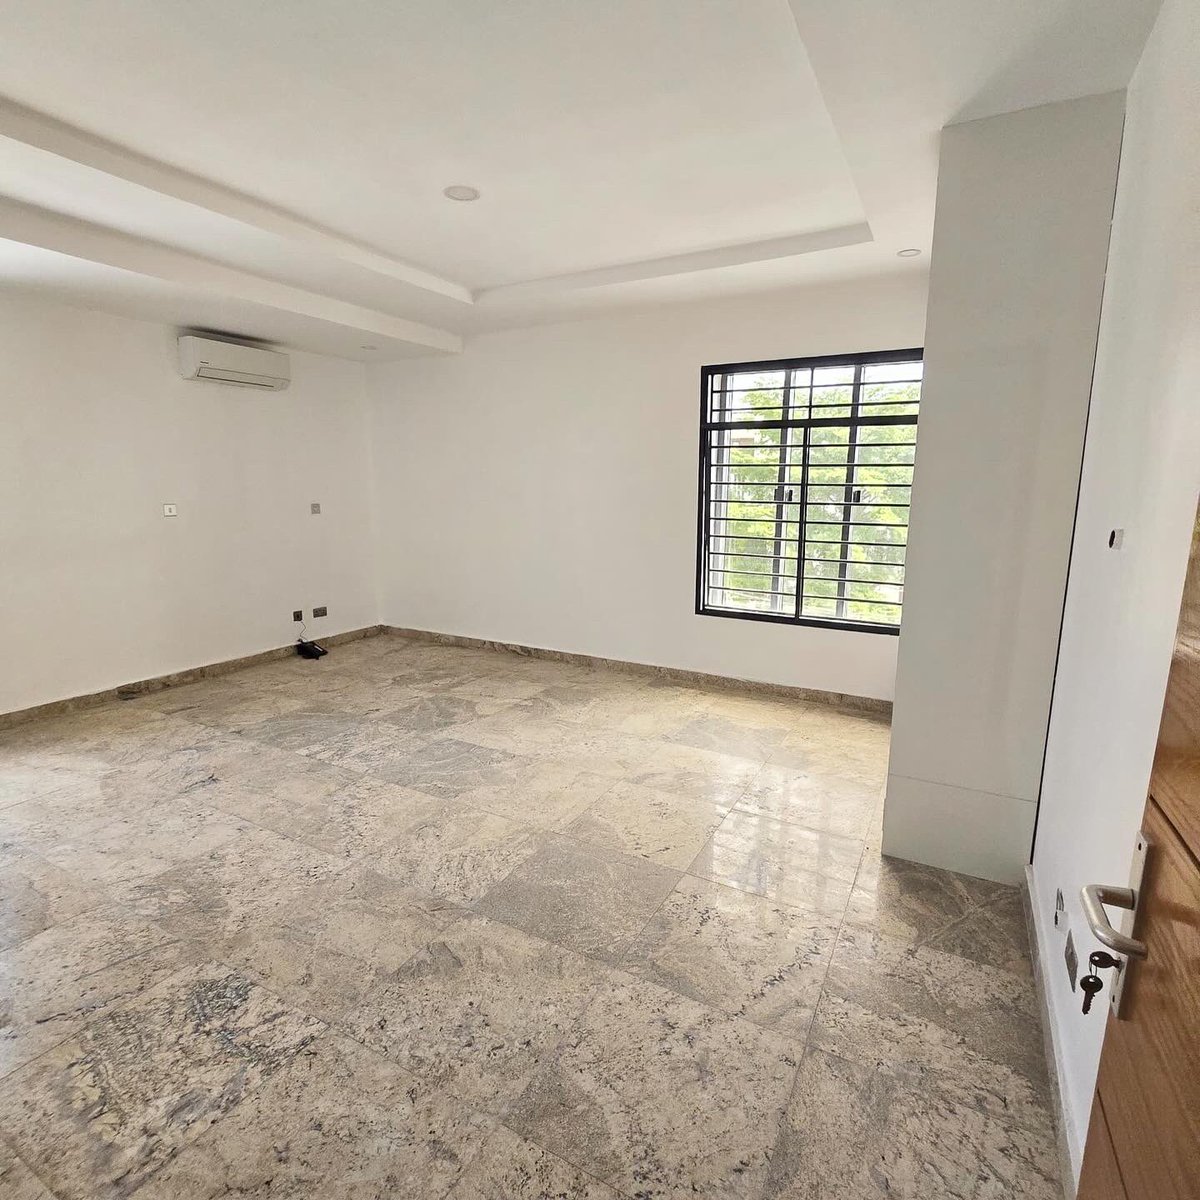 FOR RENT - Brand new 5 bedroom detached house with 2Bq and pool 🏊 
📍Location - Parkview estate, Ikoyi

Features:
Swimming pool ✅
2BQs ✅
Spacious ✅
High ceilings ✅
And more
Price : 35m 
Call us on 08082720005 for more
#Propertiesinlagos #Forrent